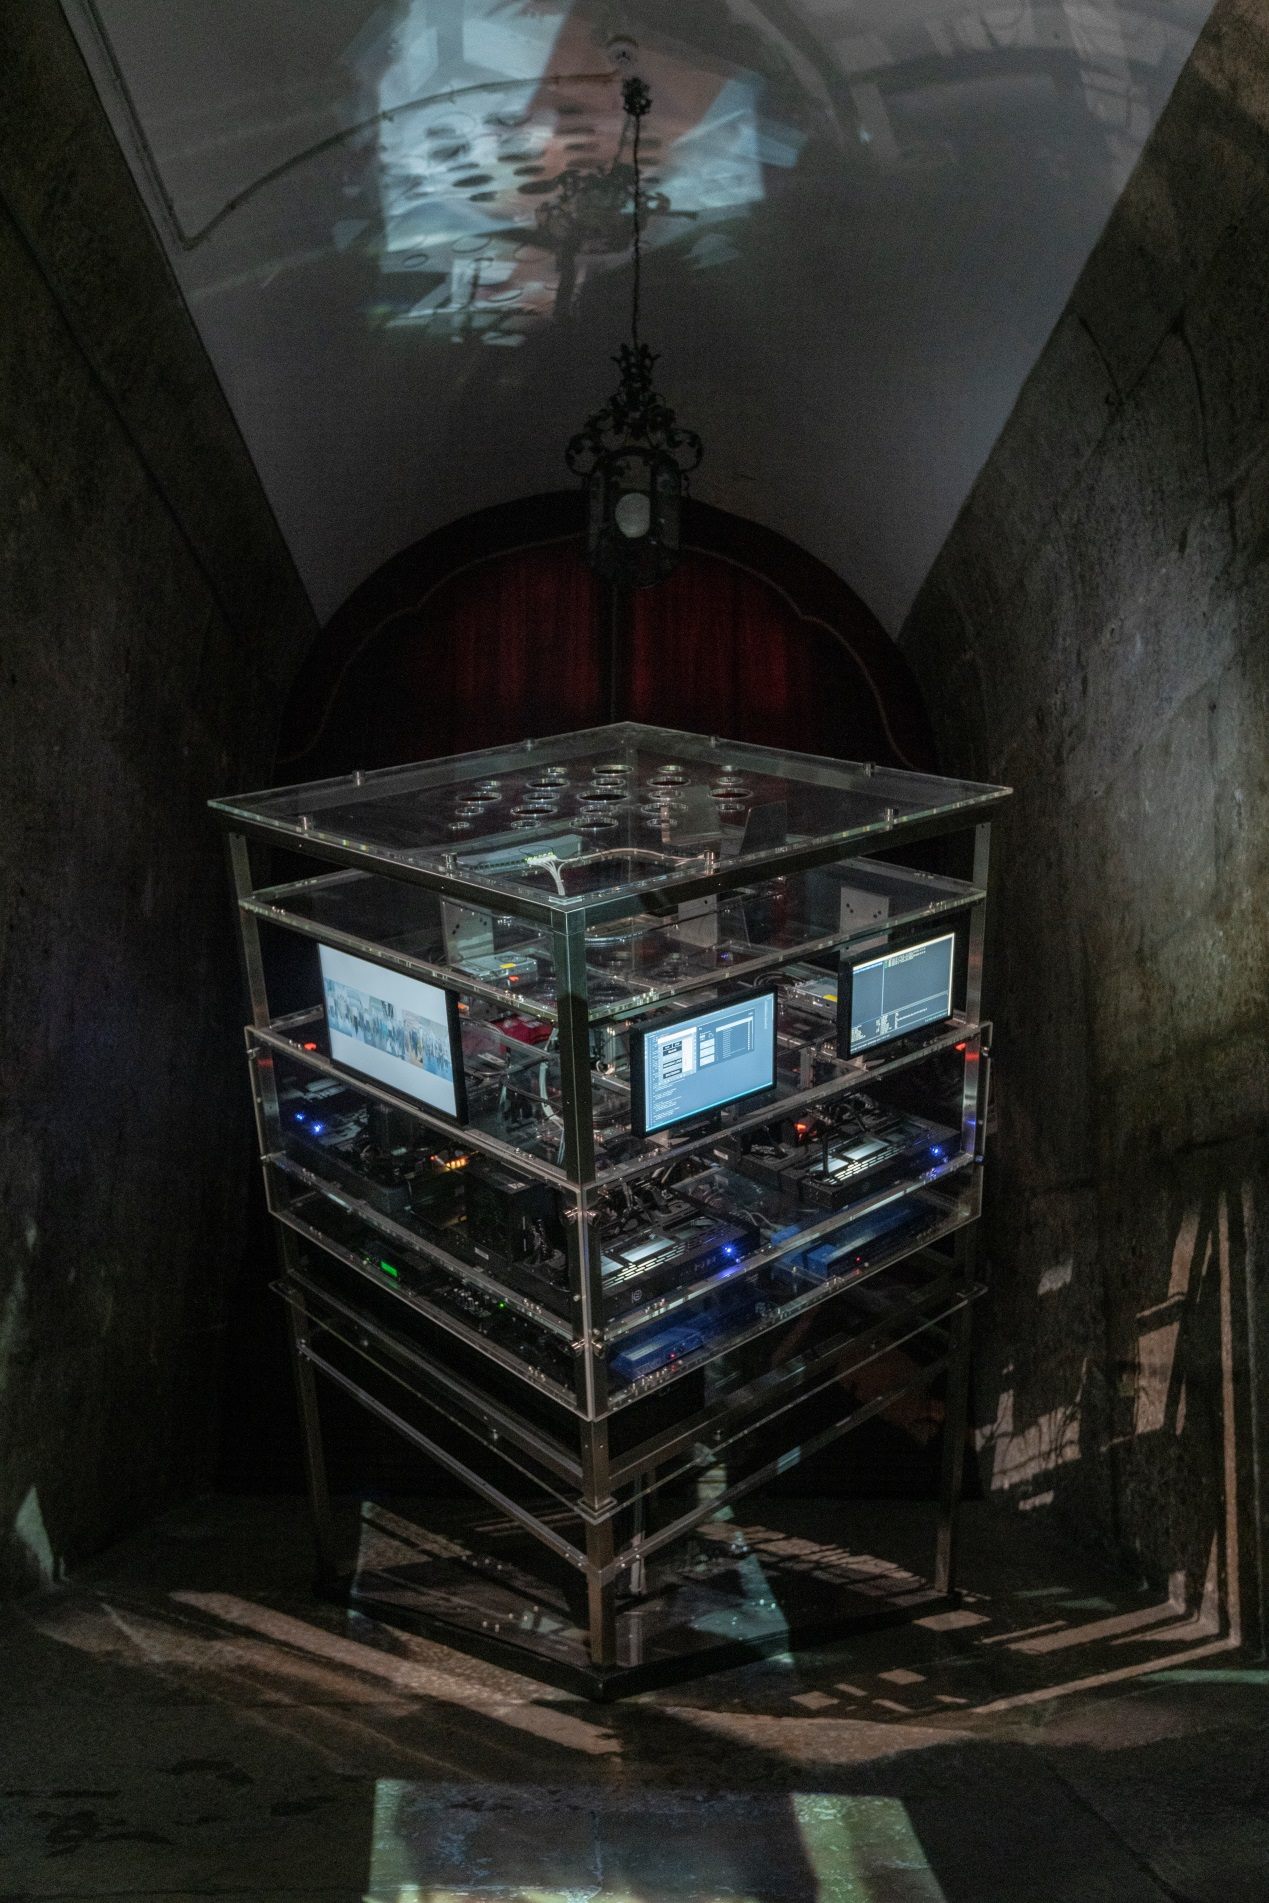 Taiwan’s artist Shu Lea Cheang’s solo exhibition in Taiwan Pavilion at the Venice Biennale uses this rotating projection tower.